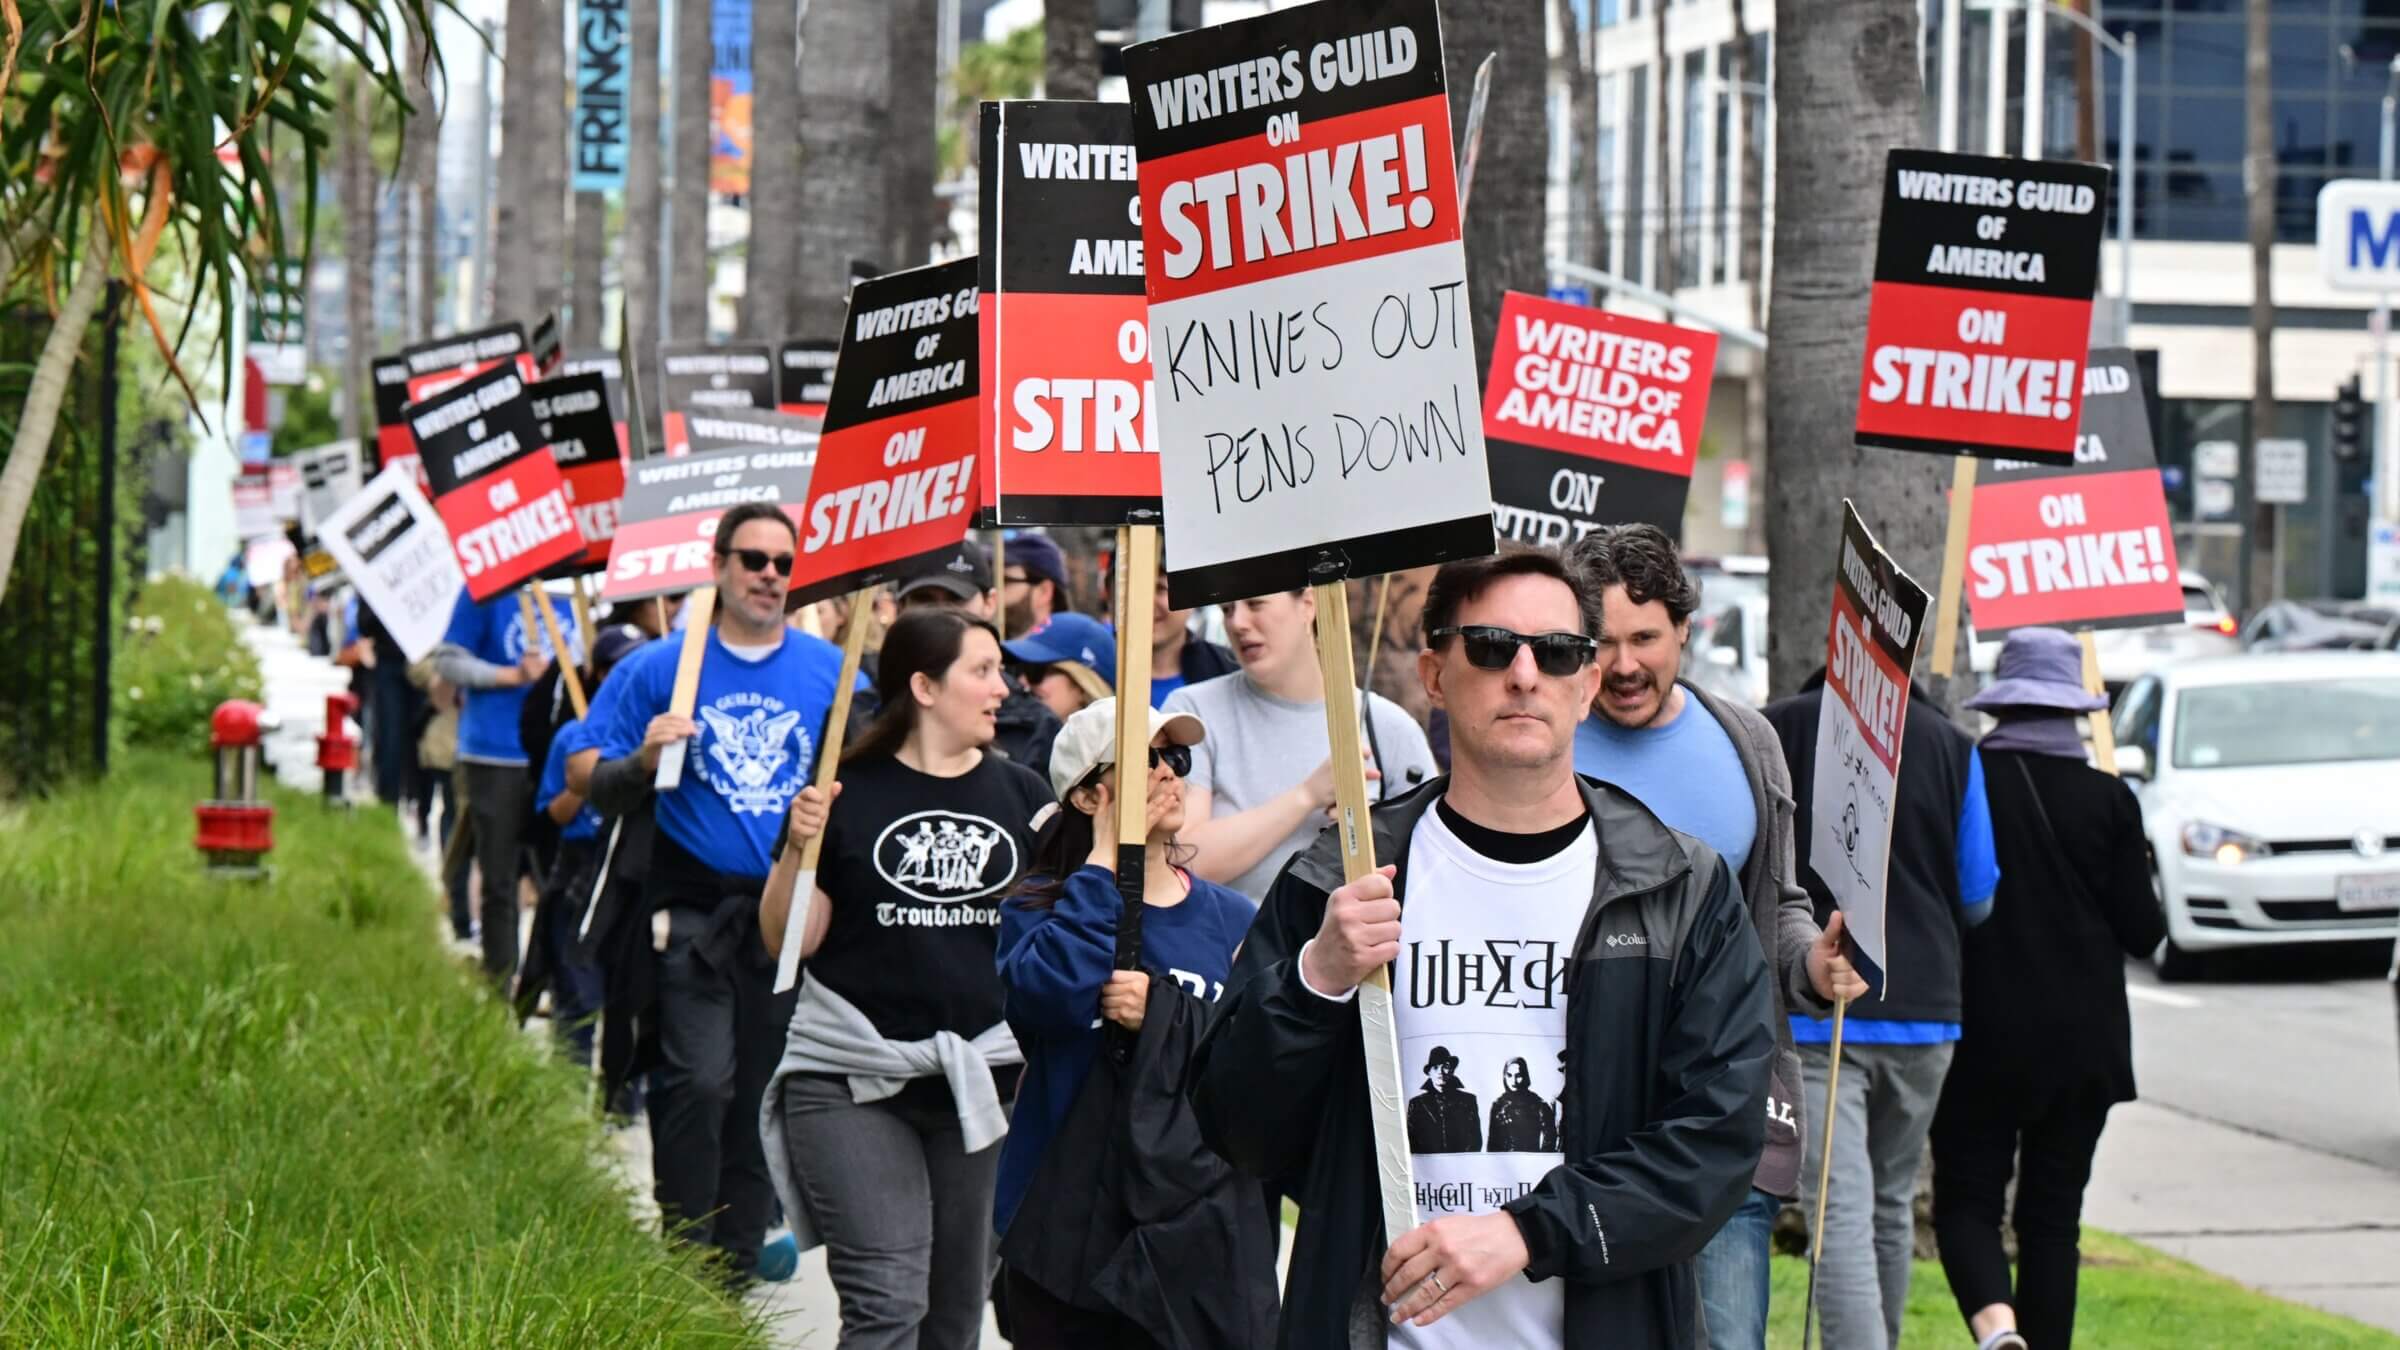 If you liked this year's Emmy-nominated shows, you may want to support striking writers.